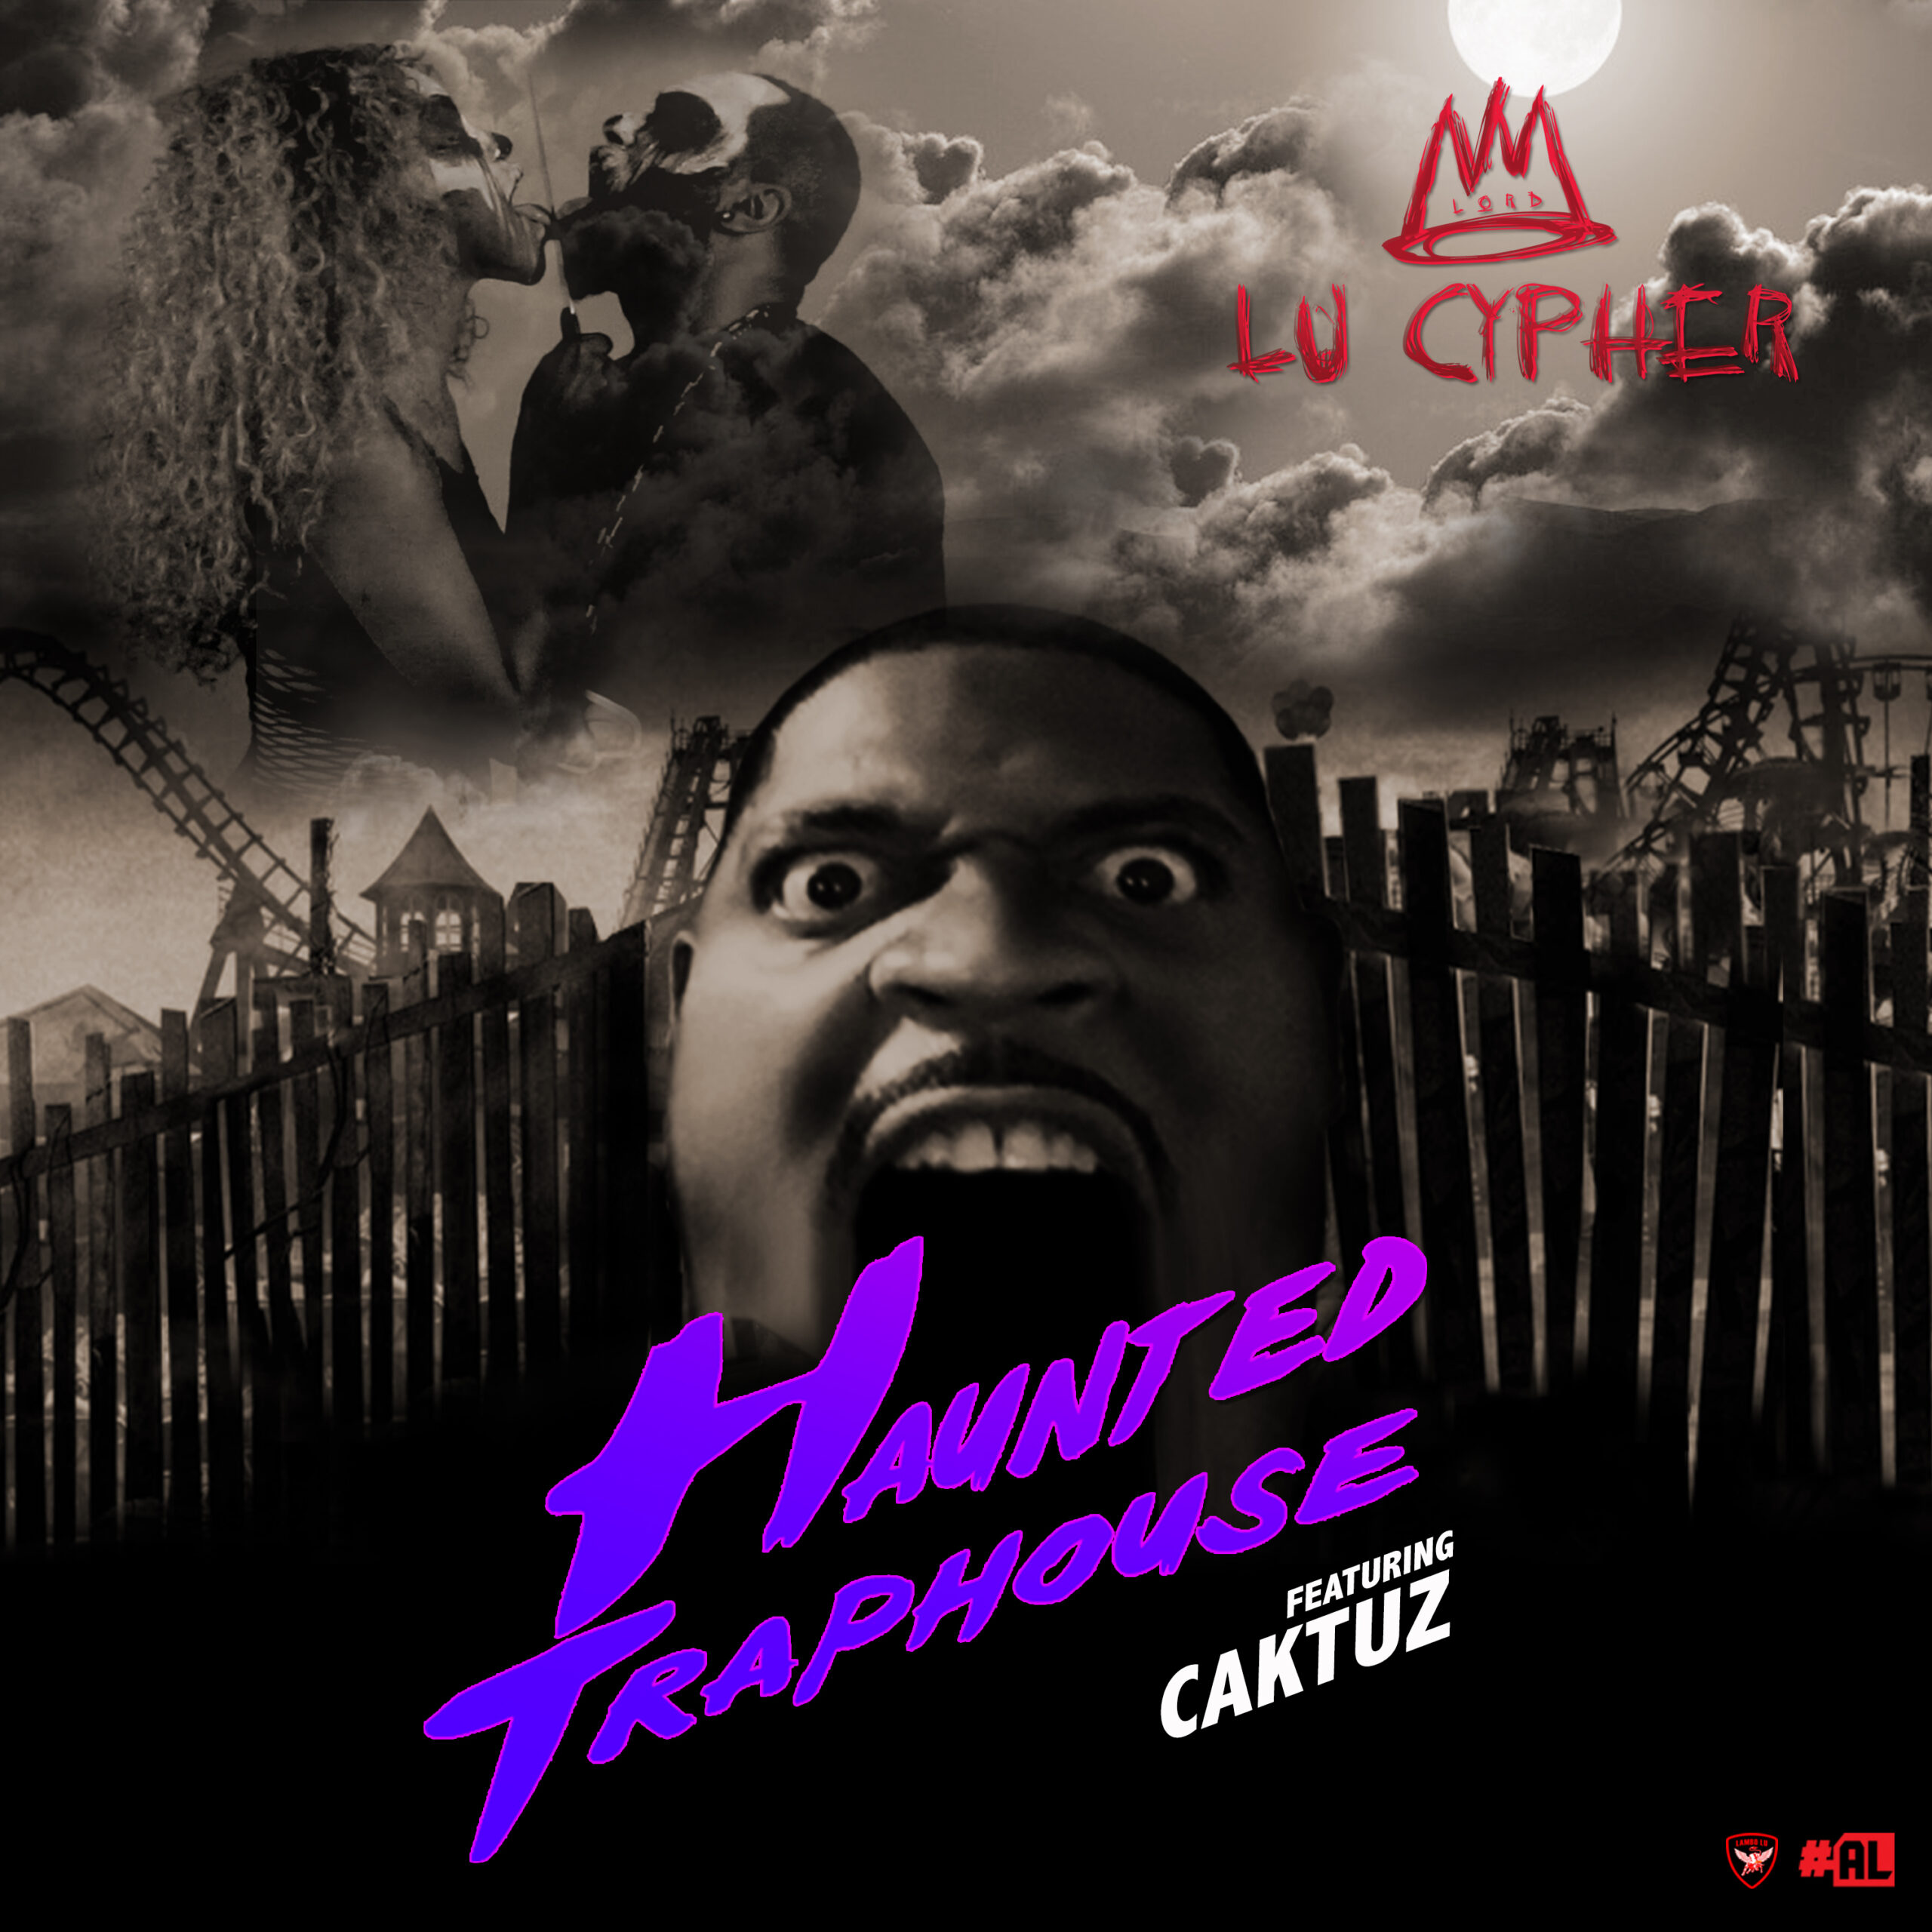 Lord Lu Cypher x Caktuz Drop Video To ‘Haunted Traphouse’ [VIDEO]